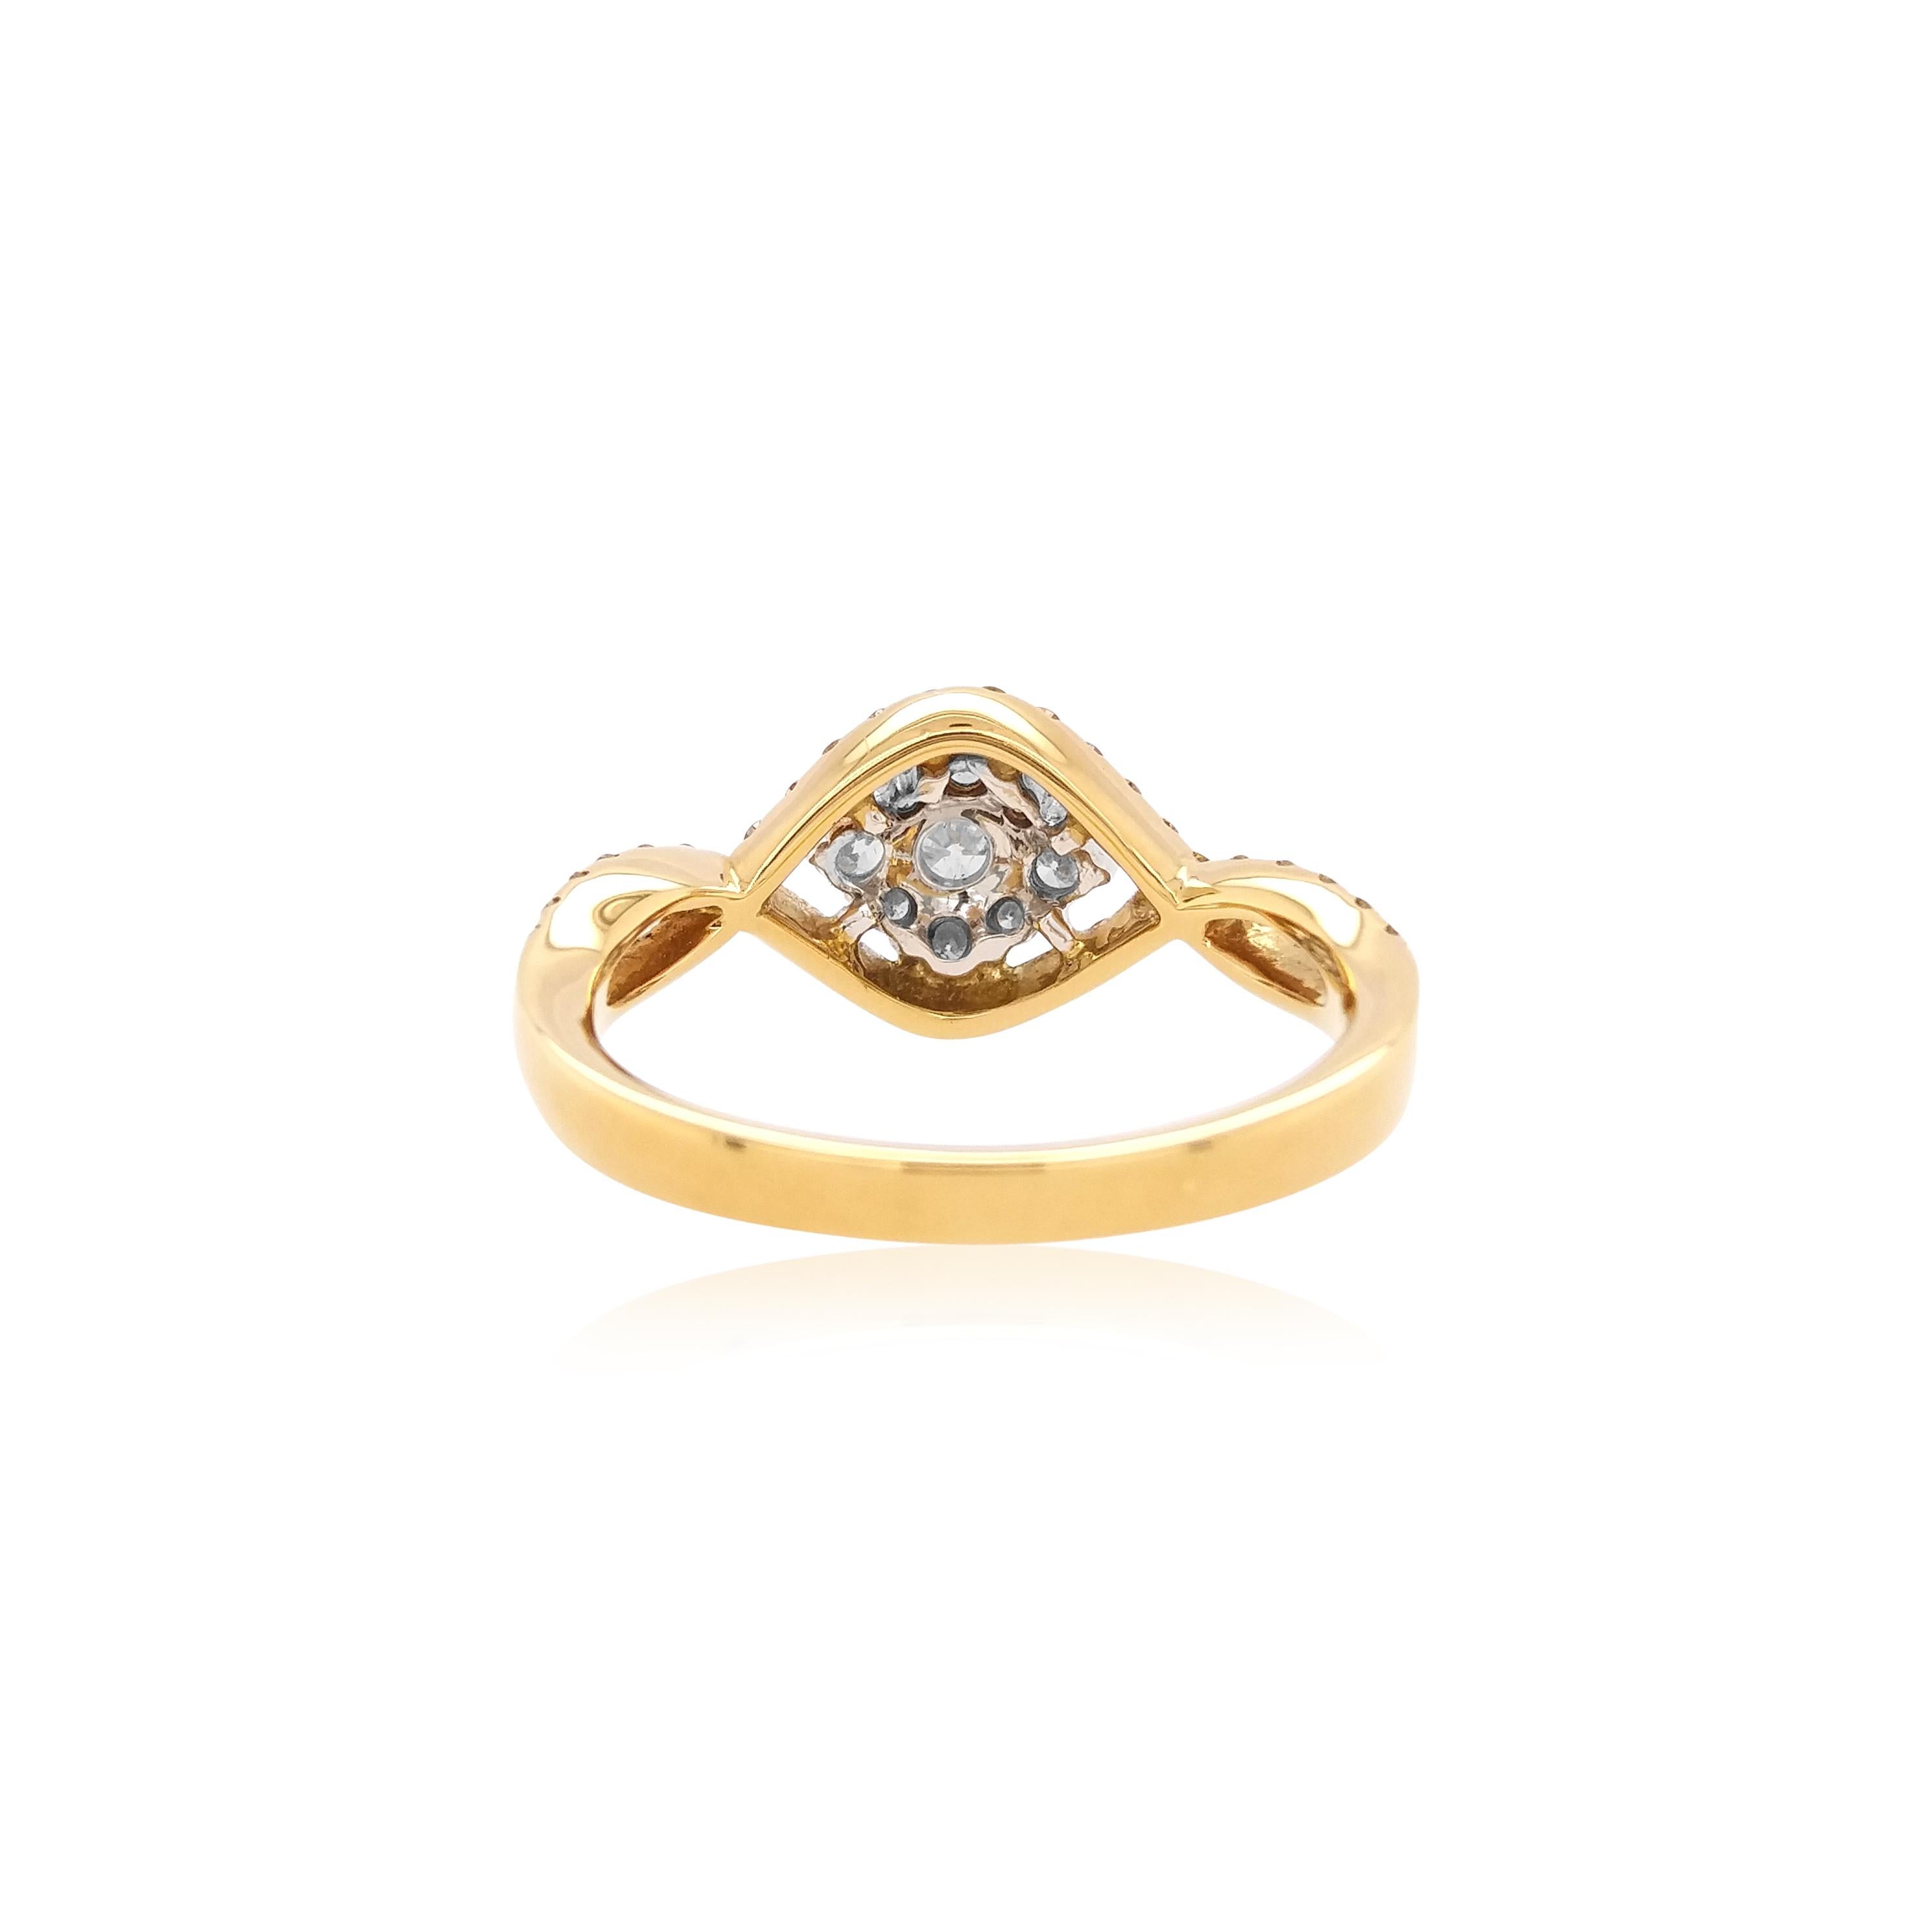 This mesmeric ring features the exceptional sparkling white diamonds at its forefront, perfectly accentuated by the yellow diamonds which surrounds it. Bold, yet intricate, set in 18 Karat white and yellow gold, this one-of-a-kind ring will add a